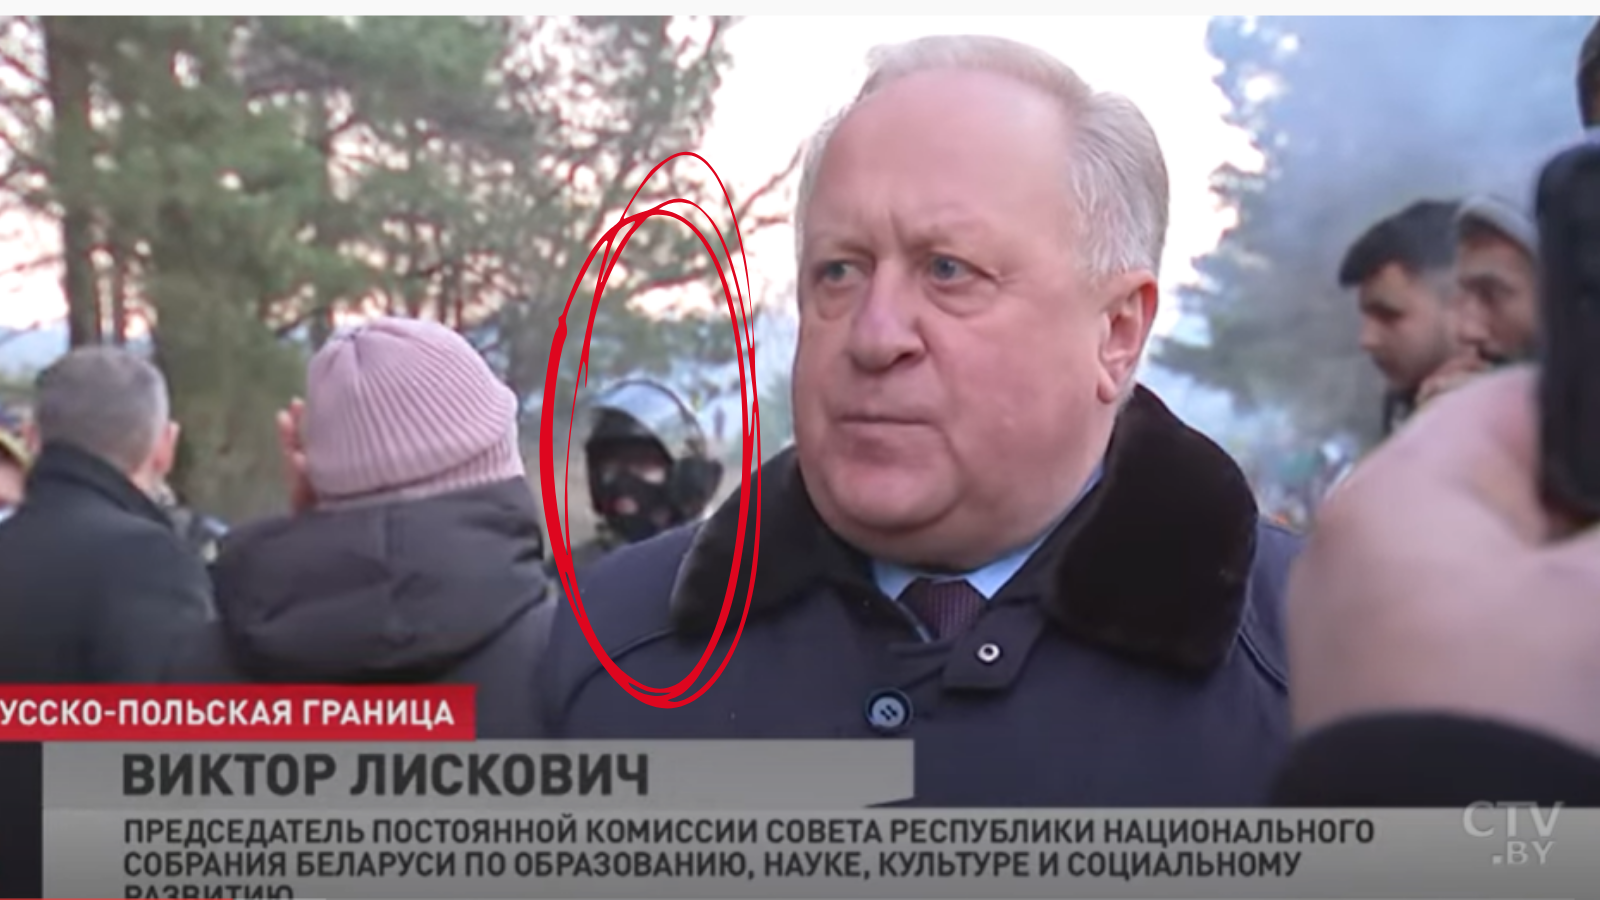 Armed Belarusian guards visible behind a parliamentarian during a TV interview